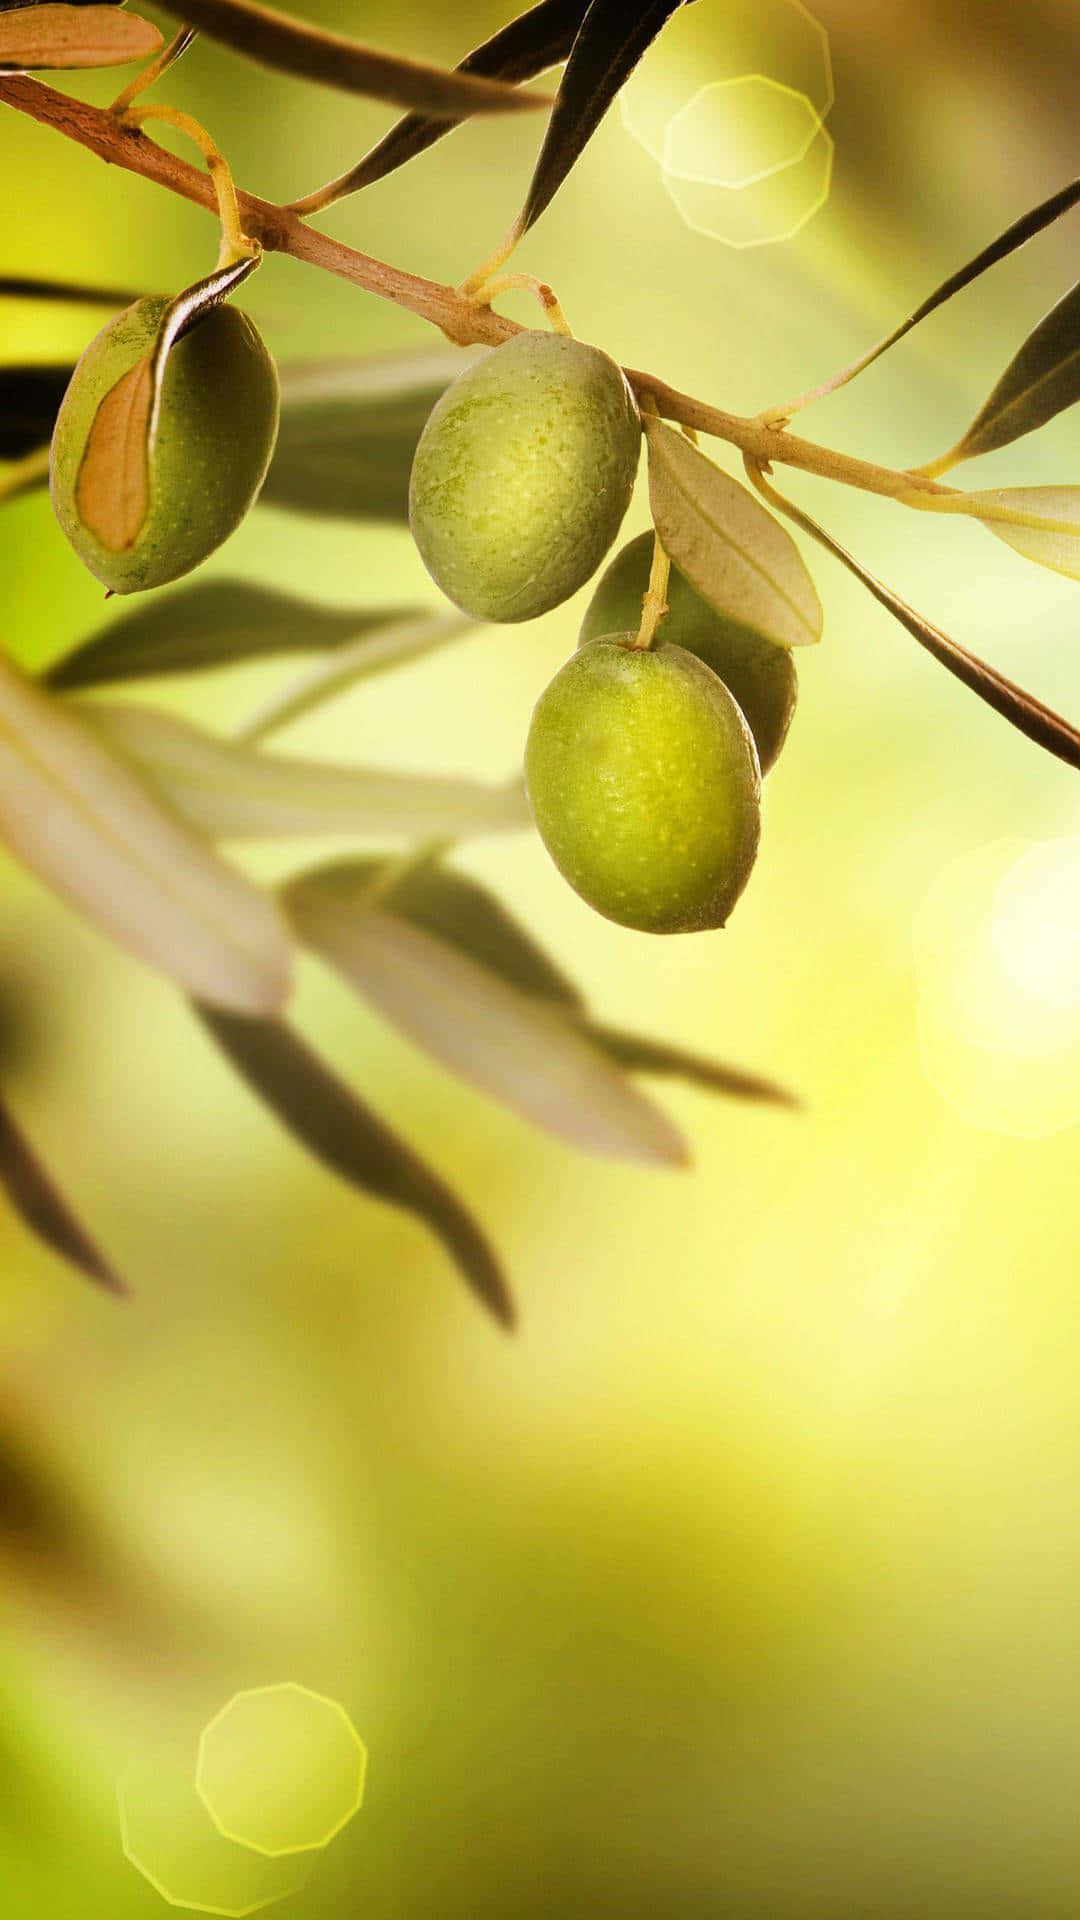 "An olive tree surrounded in nature" Wallpaper